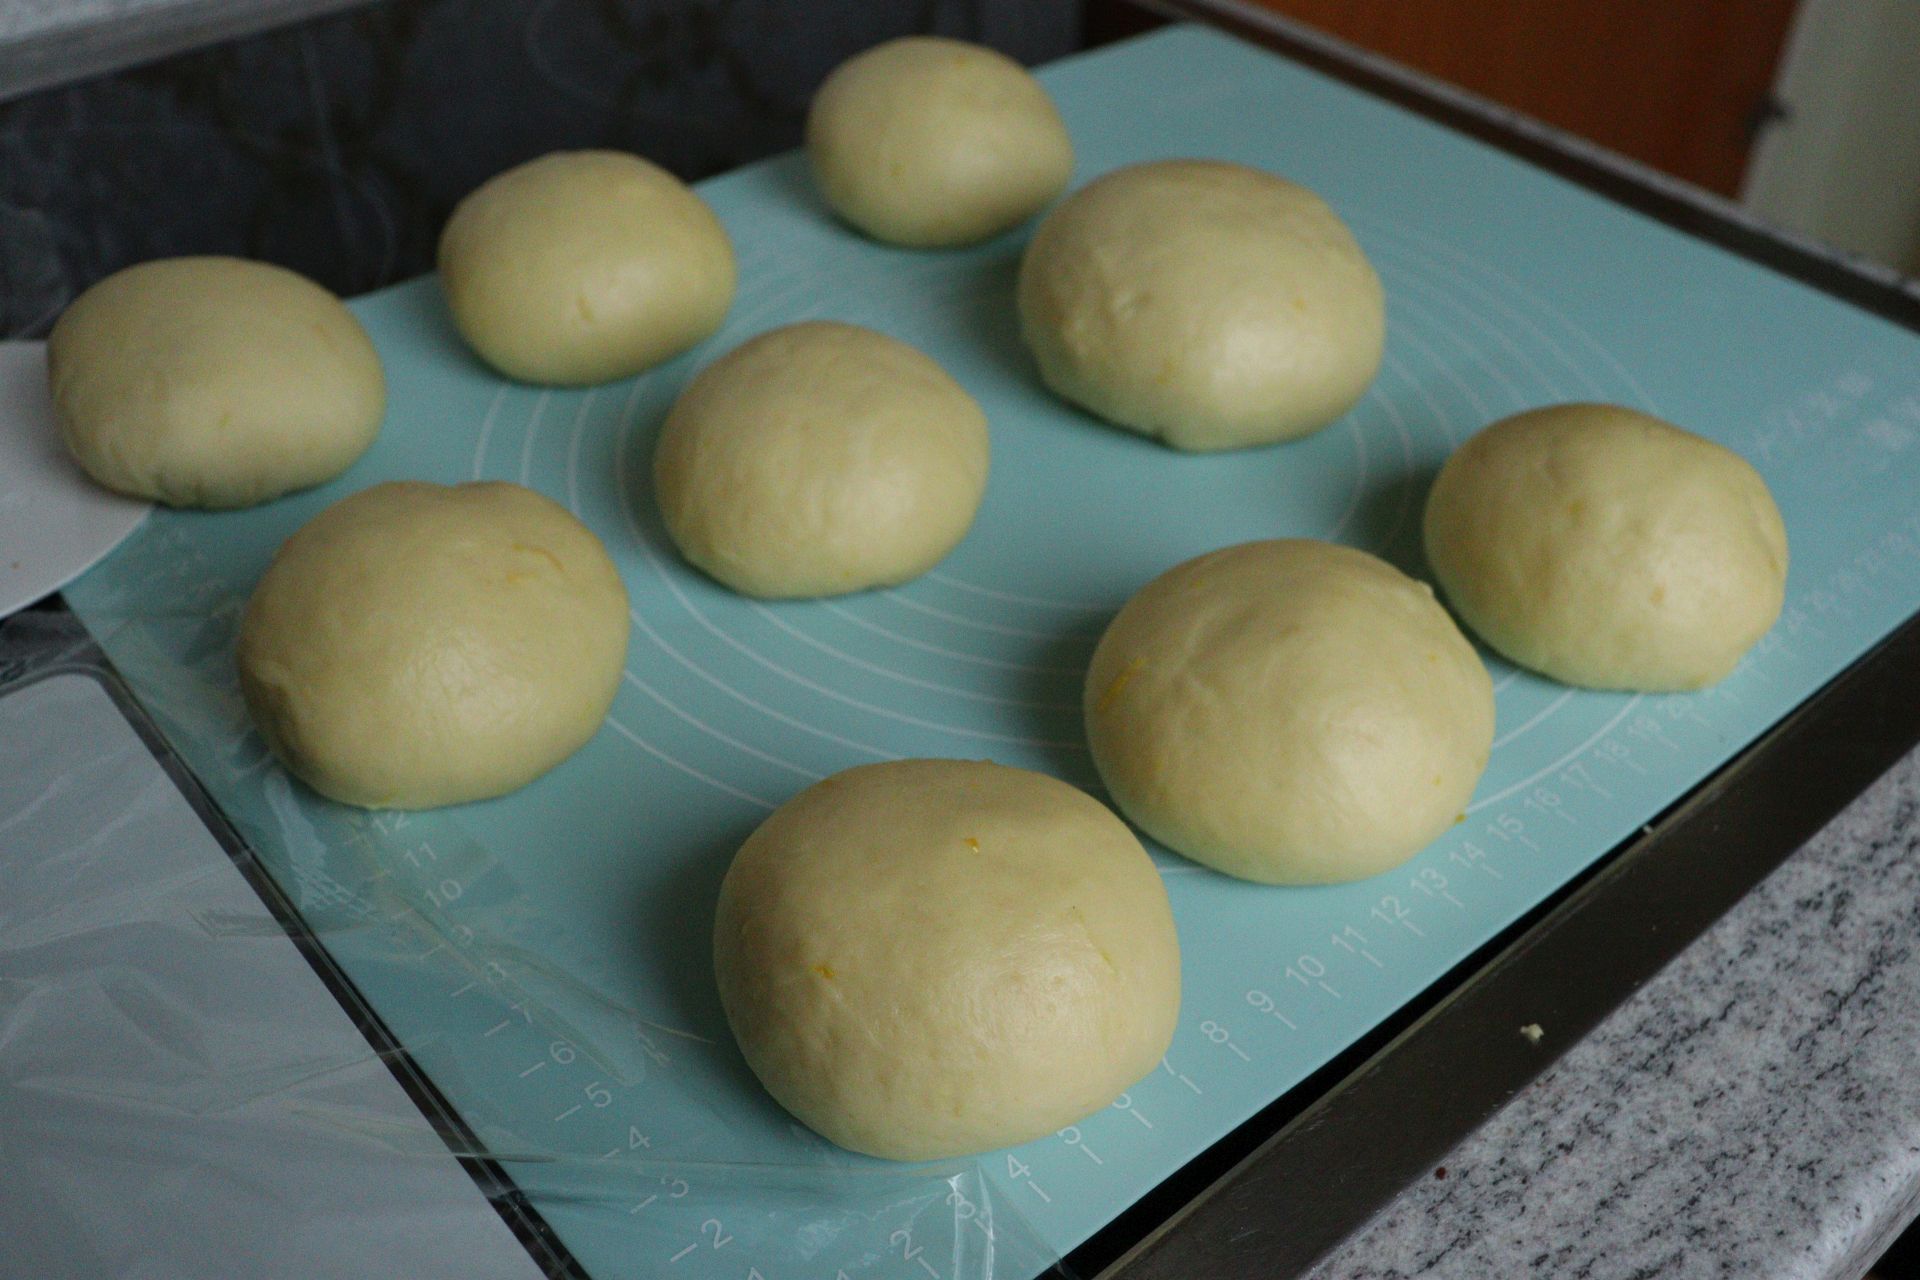 Yeast rolls for Dreikönigskuchen - Three Kings' Cake before being shaped and baked